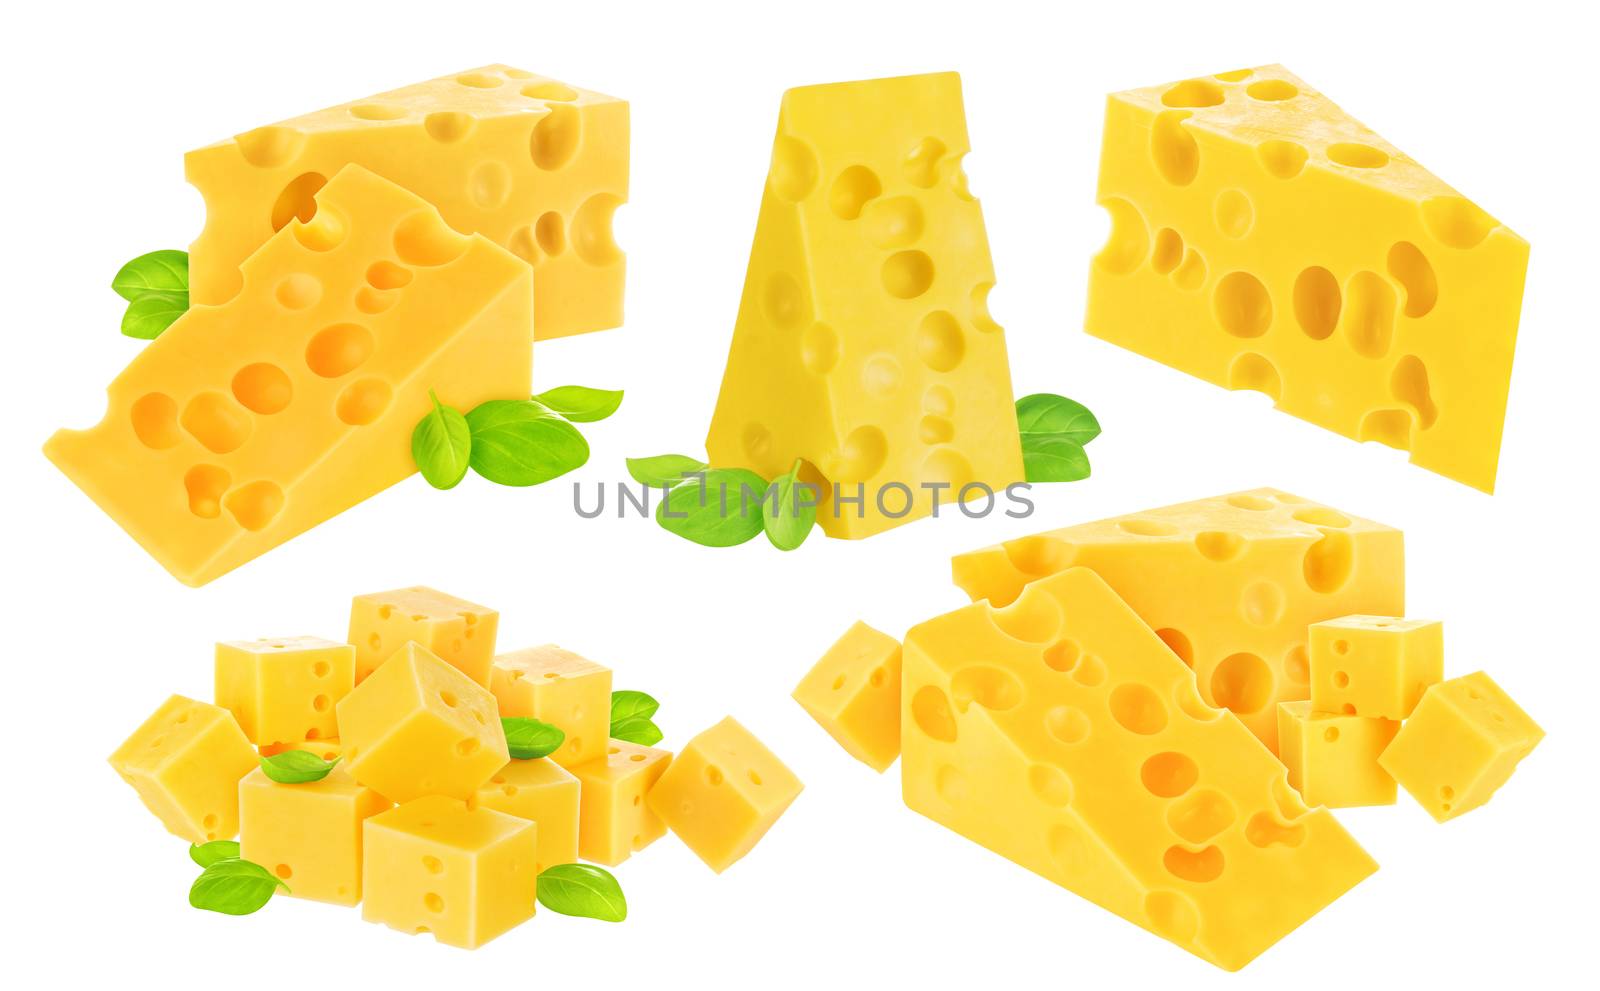 Cheese isolated on white background. Collection by xamtiw